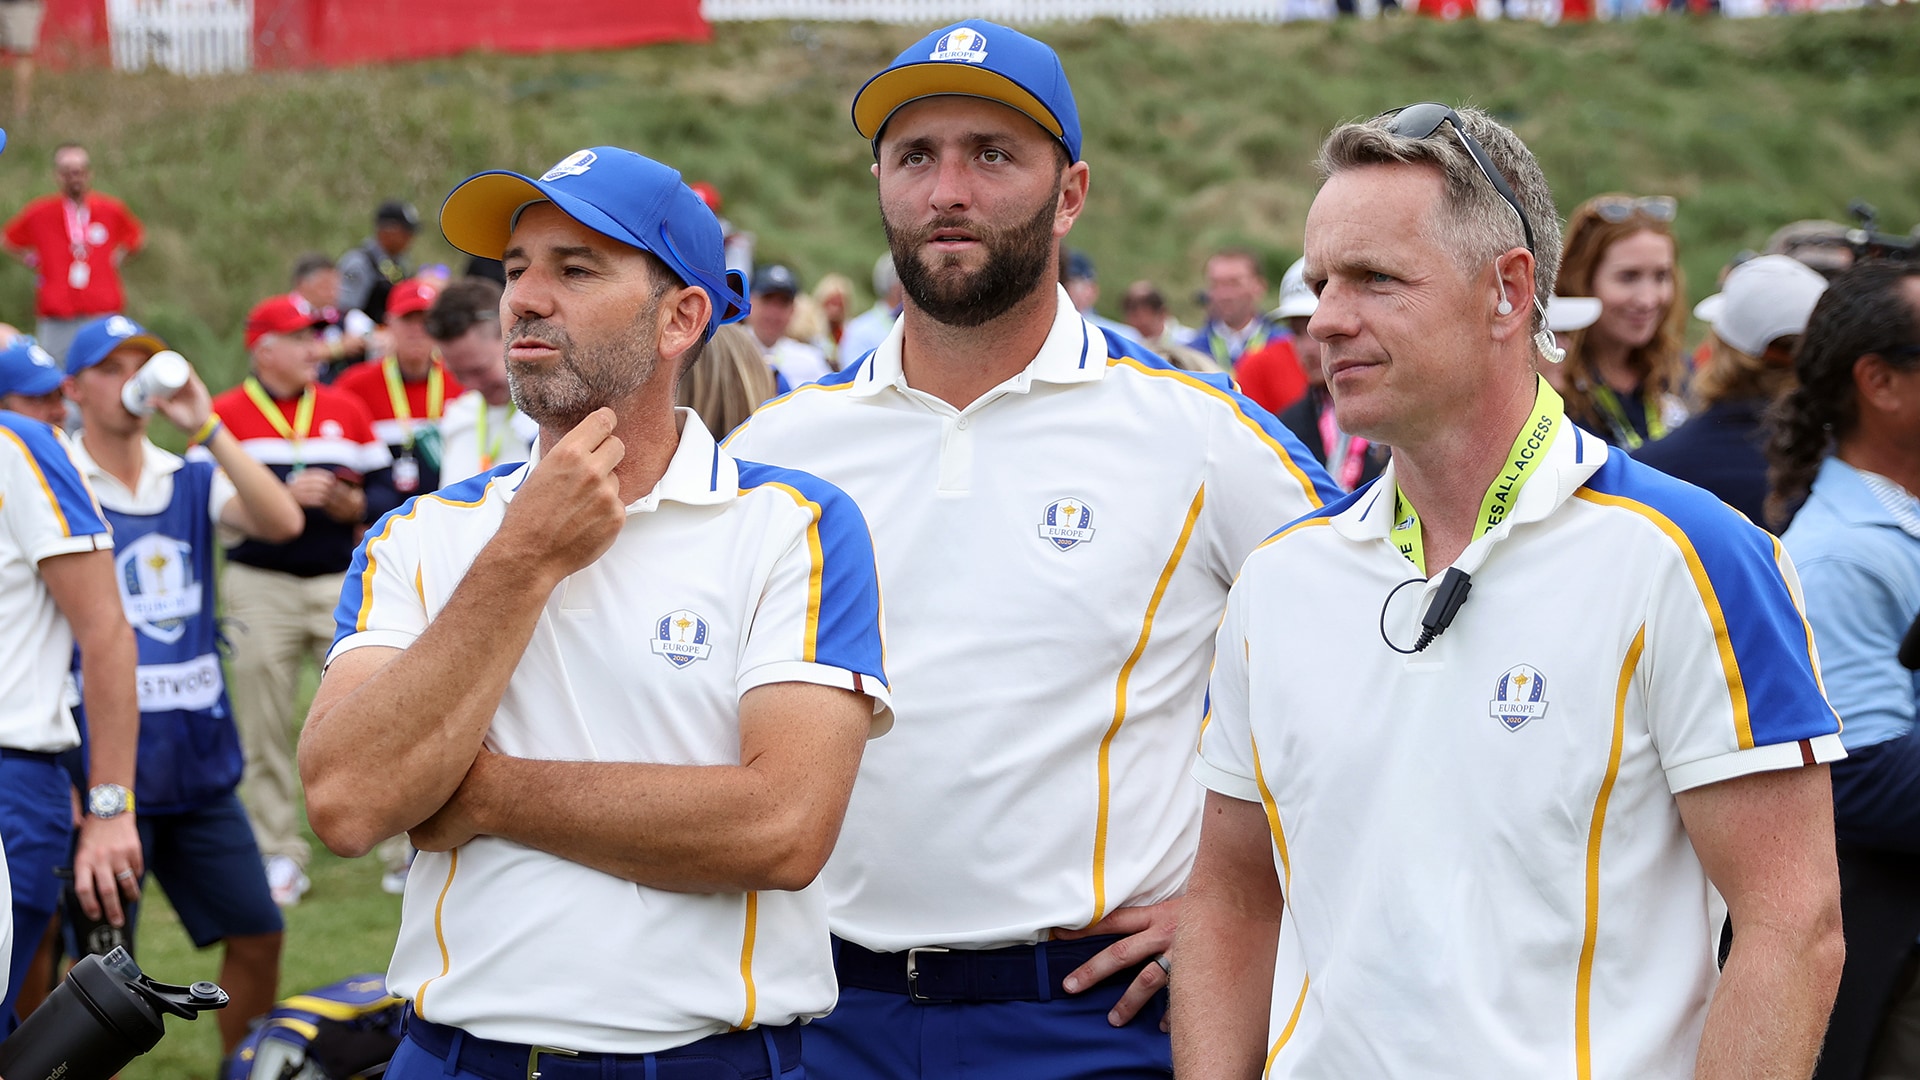 Golf Central Podcast: Ryder Cup concerns; sizing up the new PGA Tour schedule